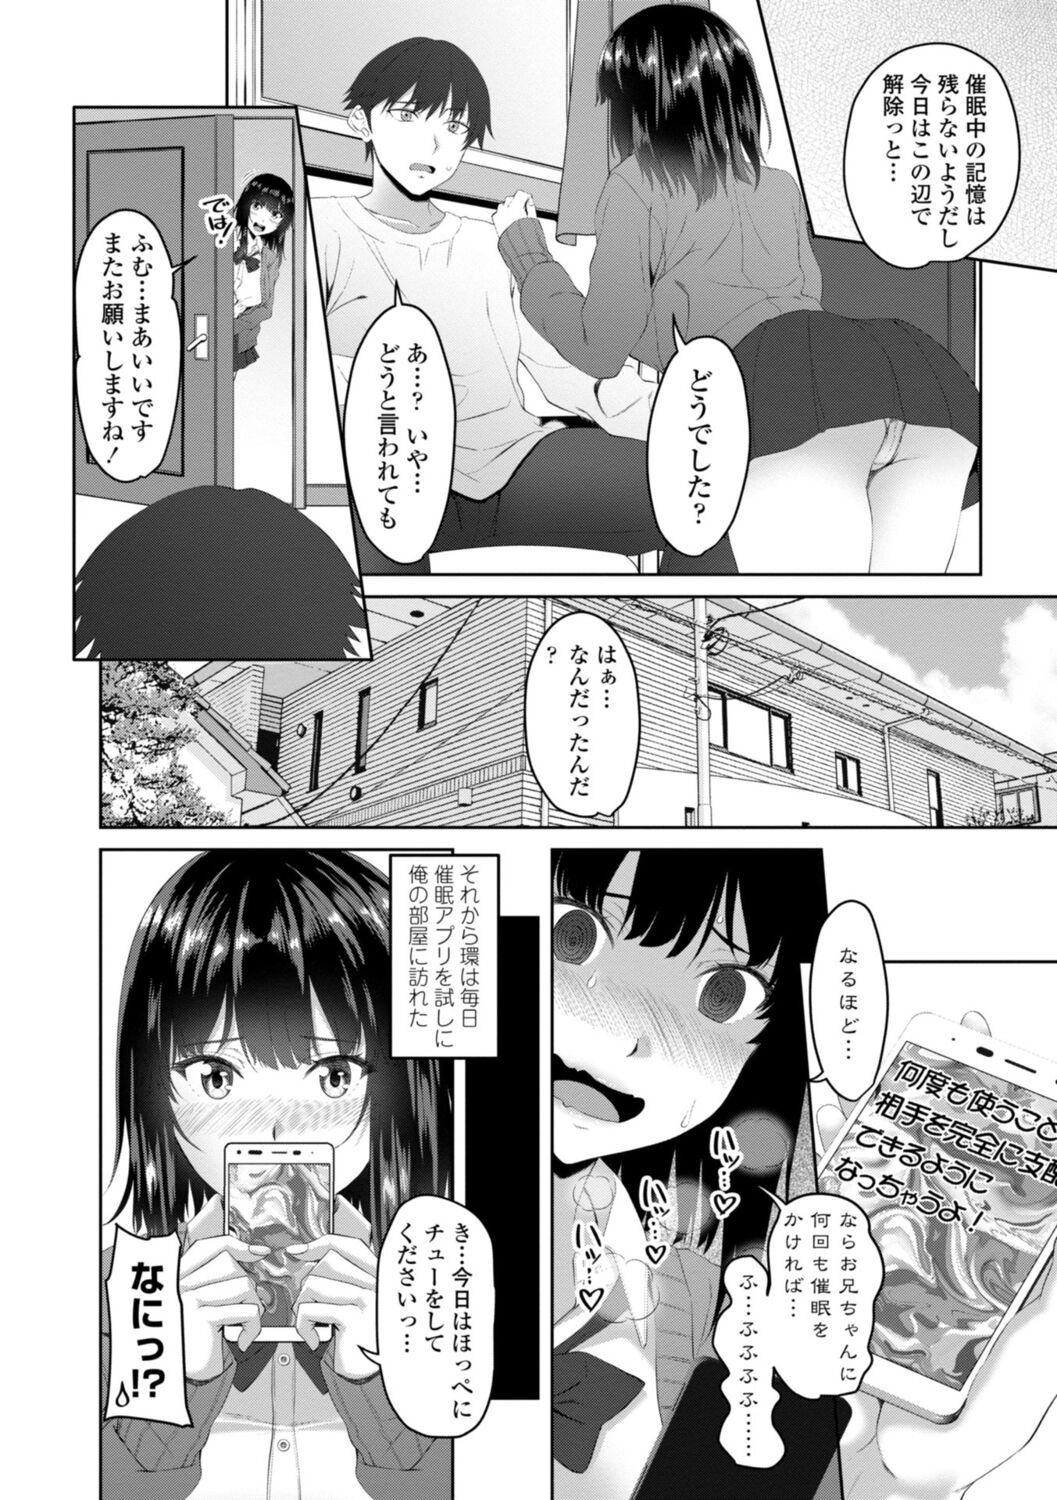 Hot Naked Women [Arsenal] Onii-chan no H na Otoshikata - How to make your brother like you for sex. [Digital] Fucking Hard - Page 8